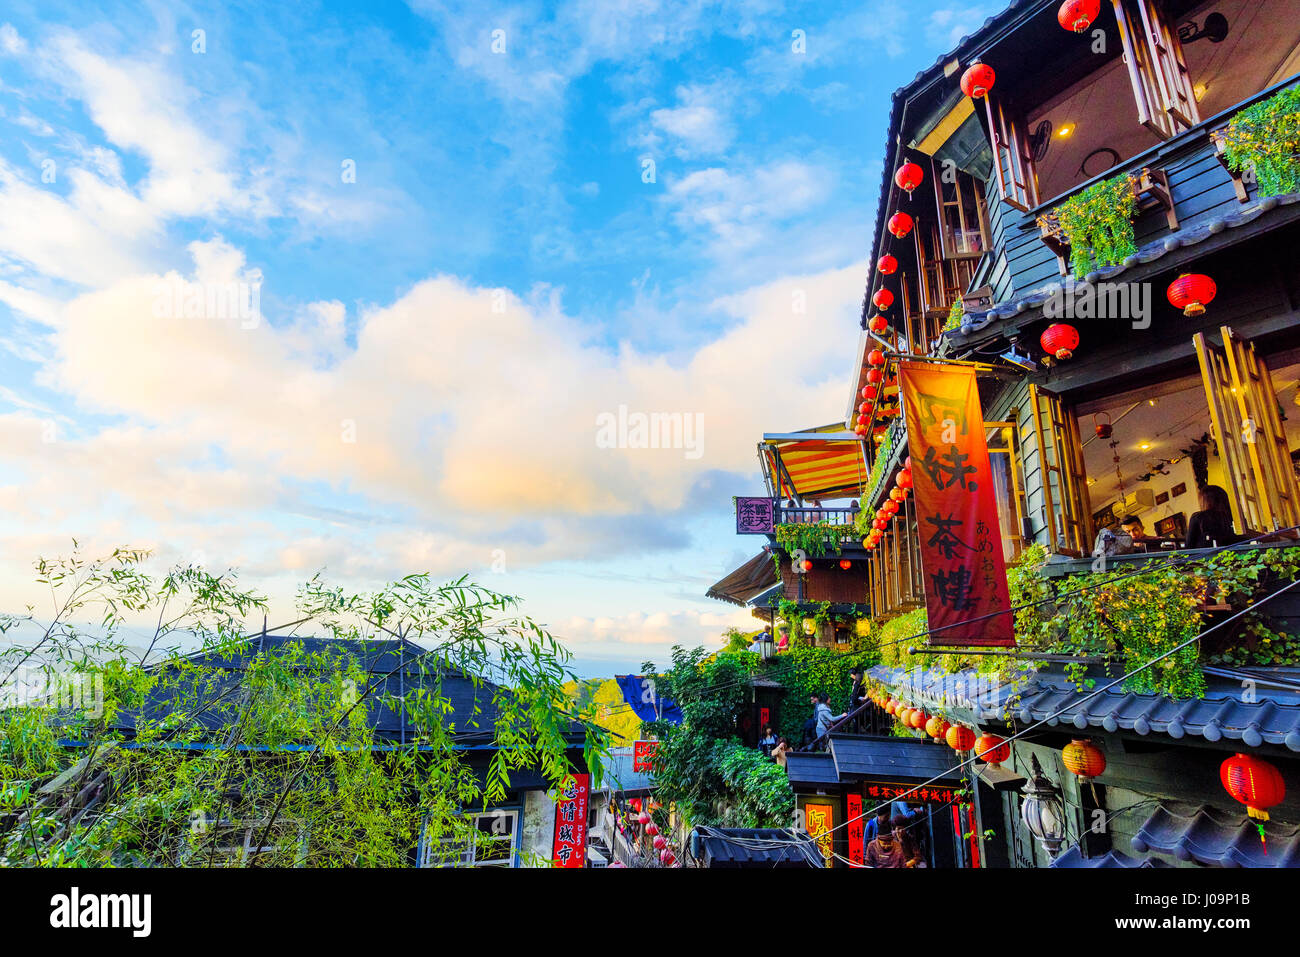 TAIPEI, TAIWAN - DECEMBER 19: This is the old architecture of Jiufen teahouses where many people come to travel in Taiwan  on December 19, 2016 in Tai Stock Photo